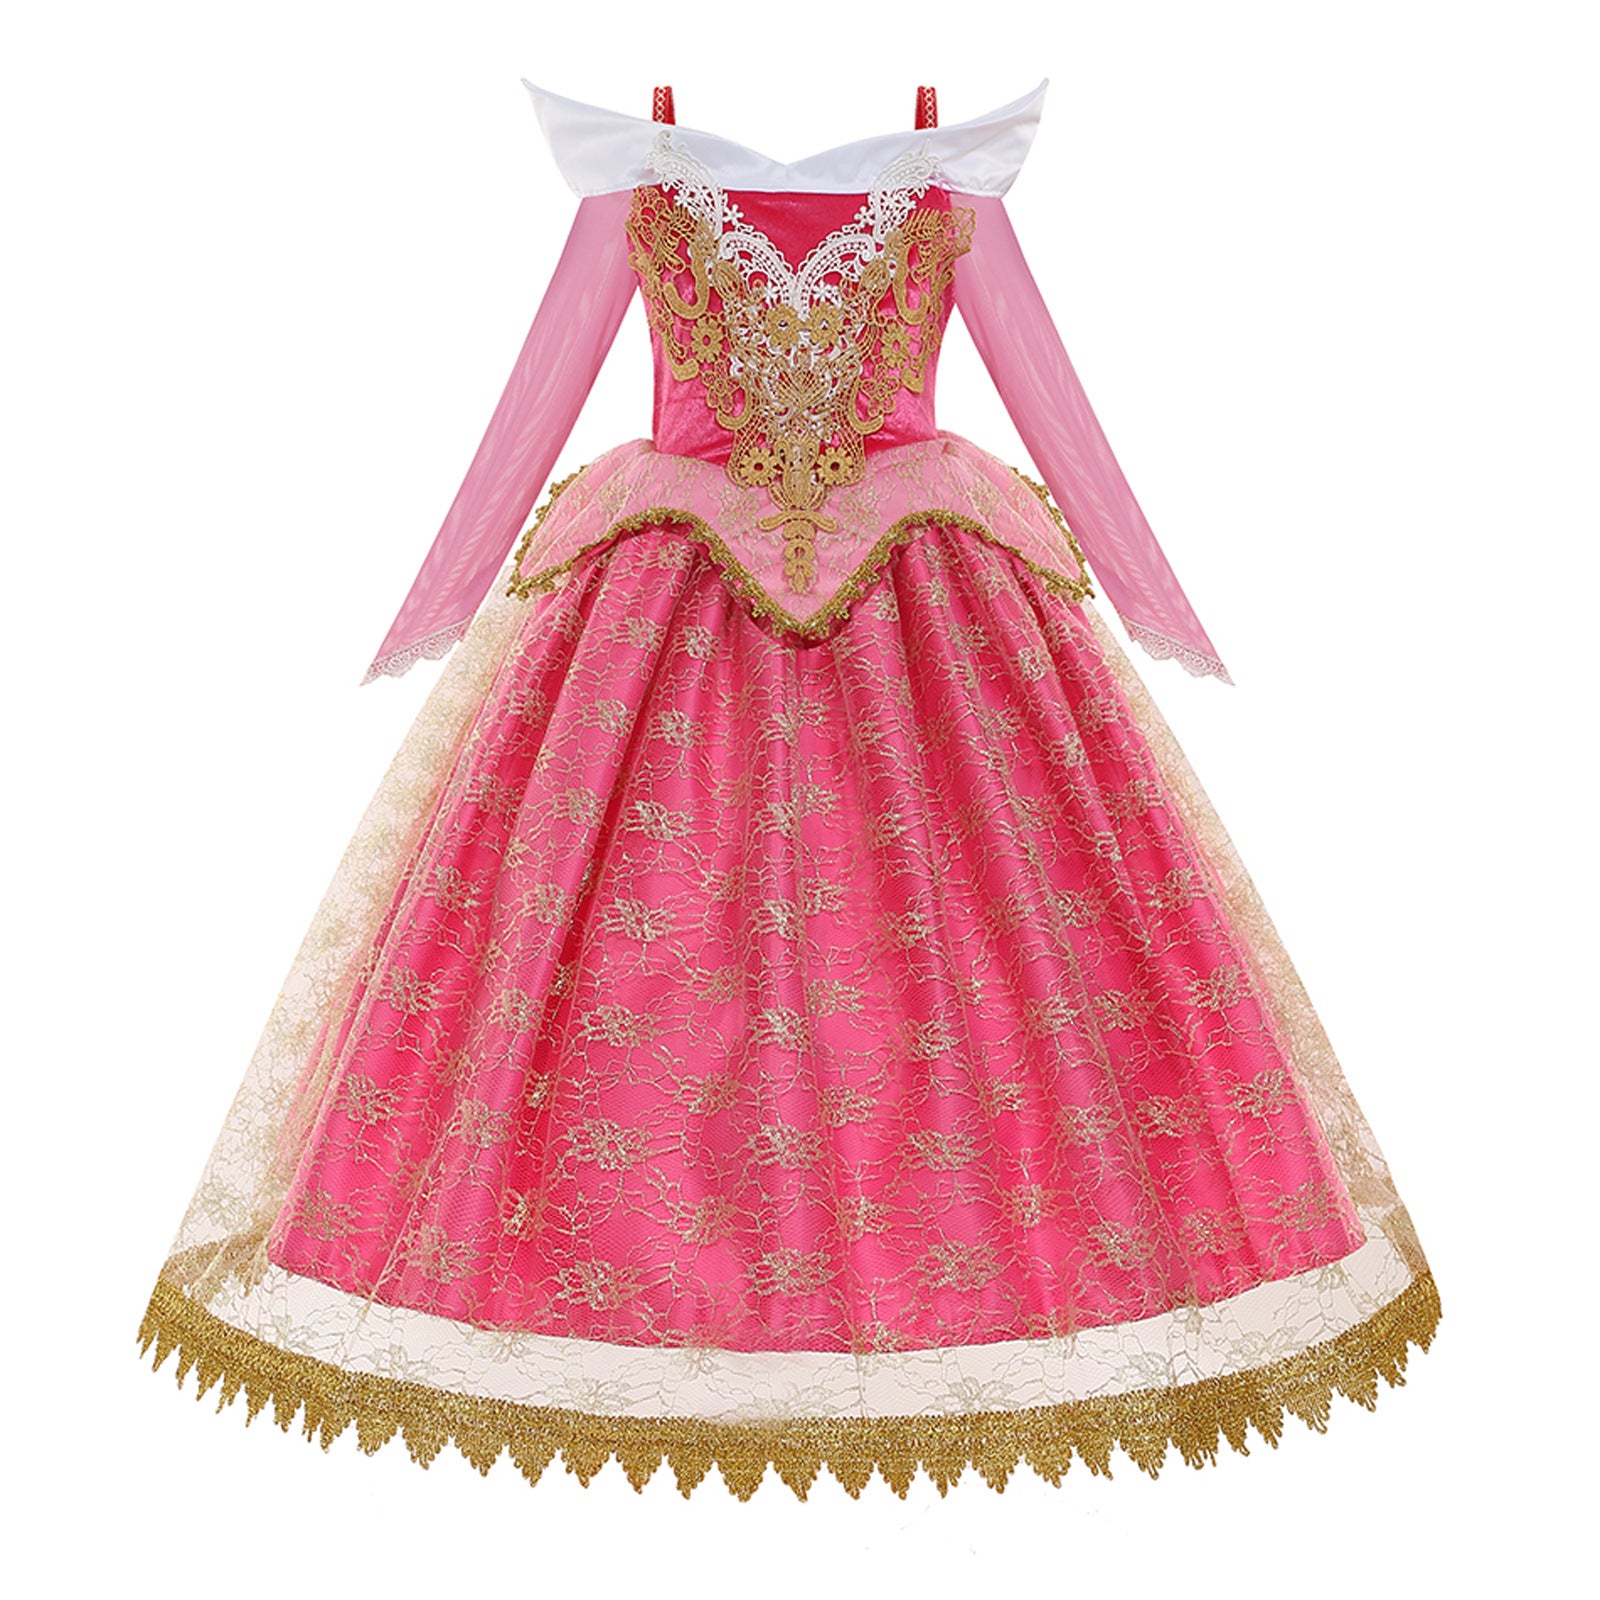 Embroidered Golden Lace Luxury Rose Red Costume Piano Dancing Sleeping Beauty Princess Dresses